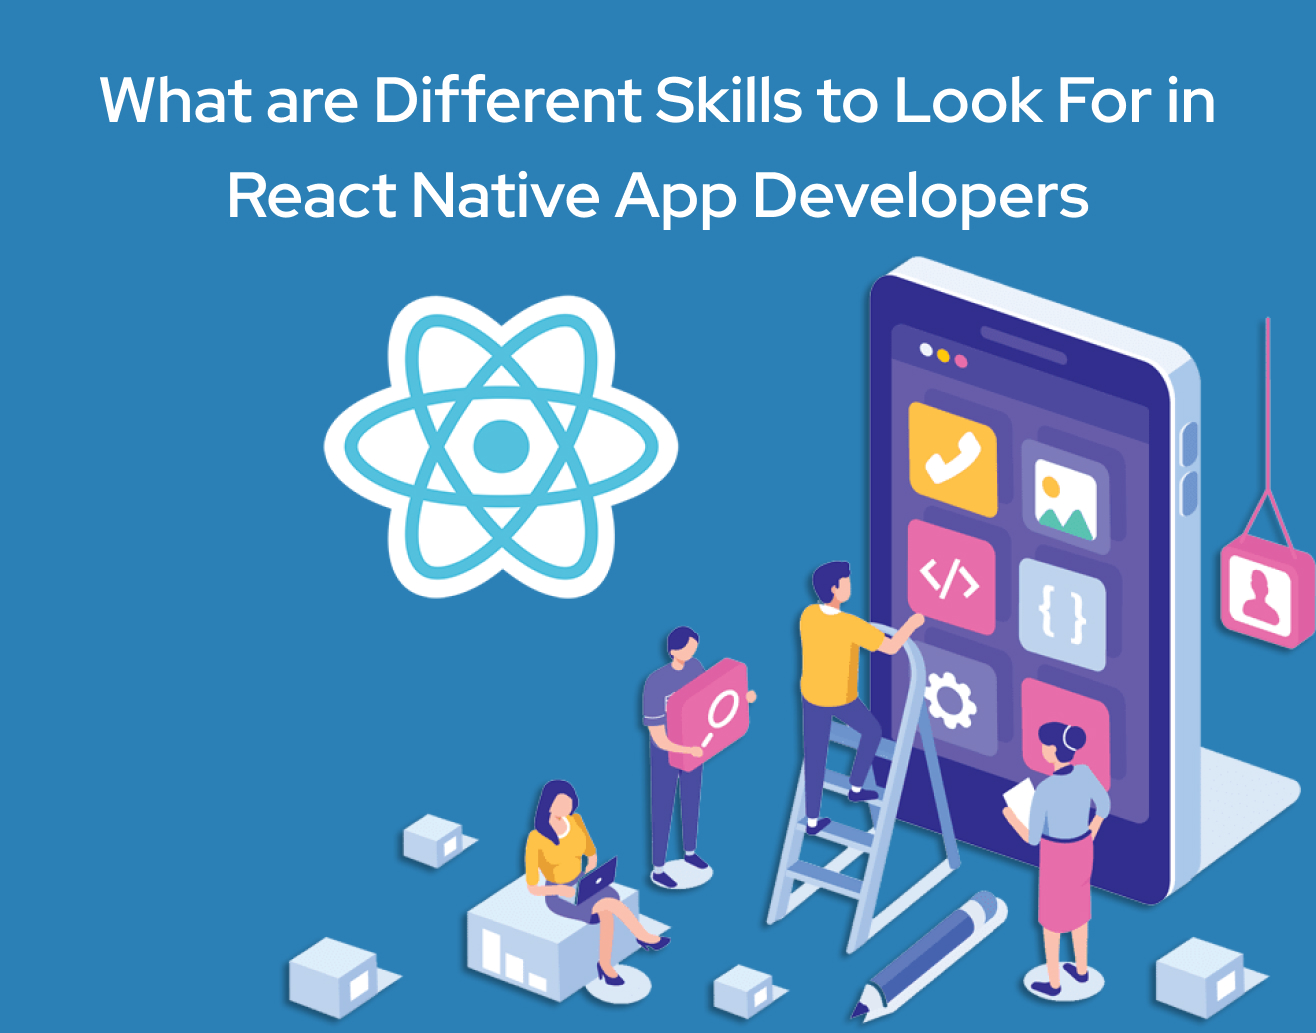 What are Different Skills to Look For in React Native App Developers